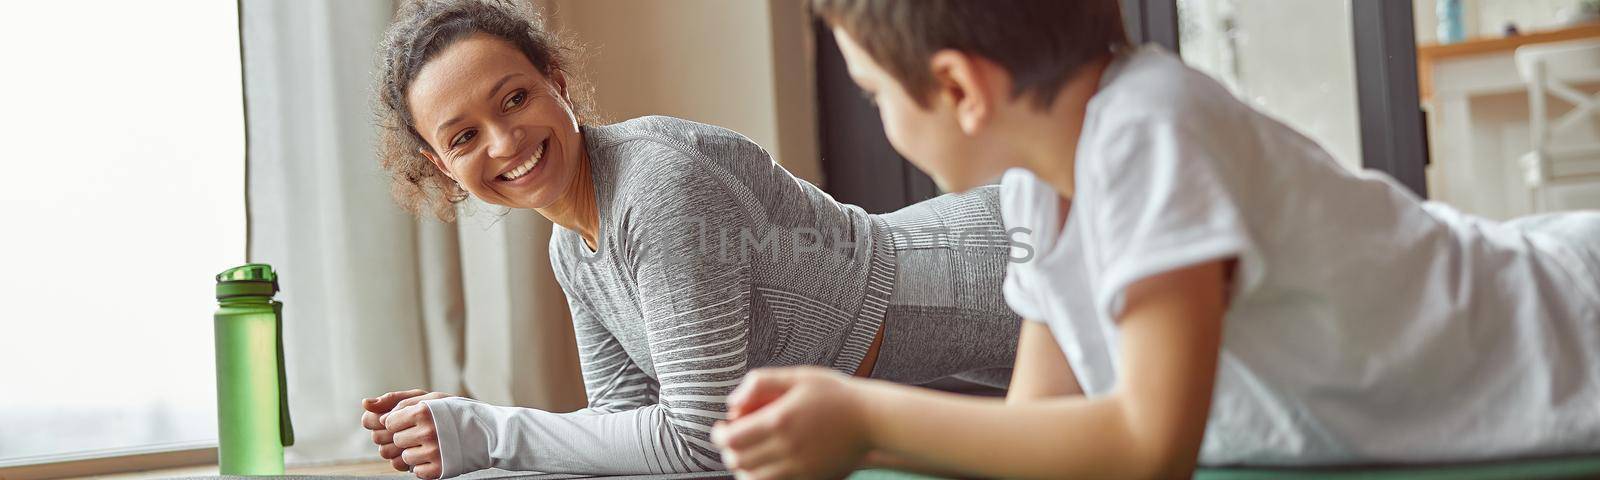 Cheerful mom enjoying workout with son indoors by Yaroslav_astakhov